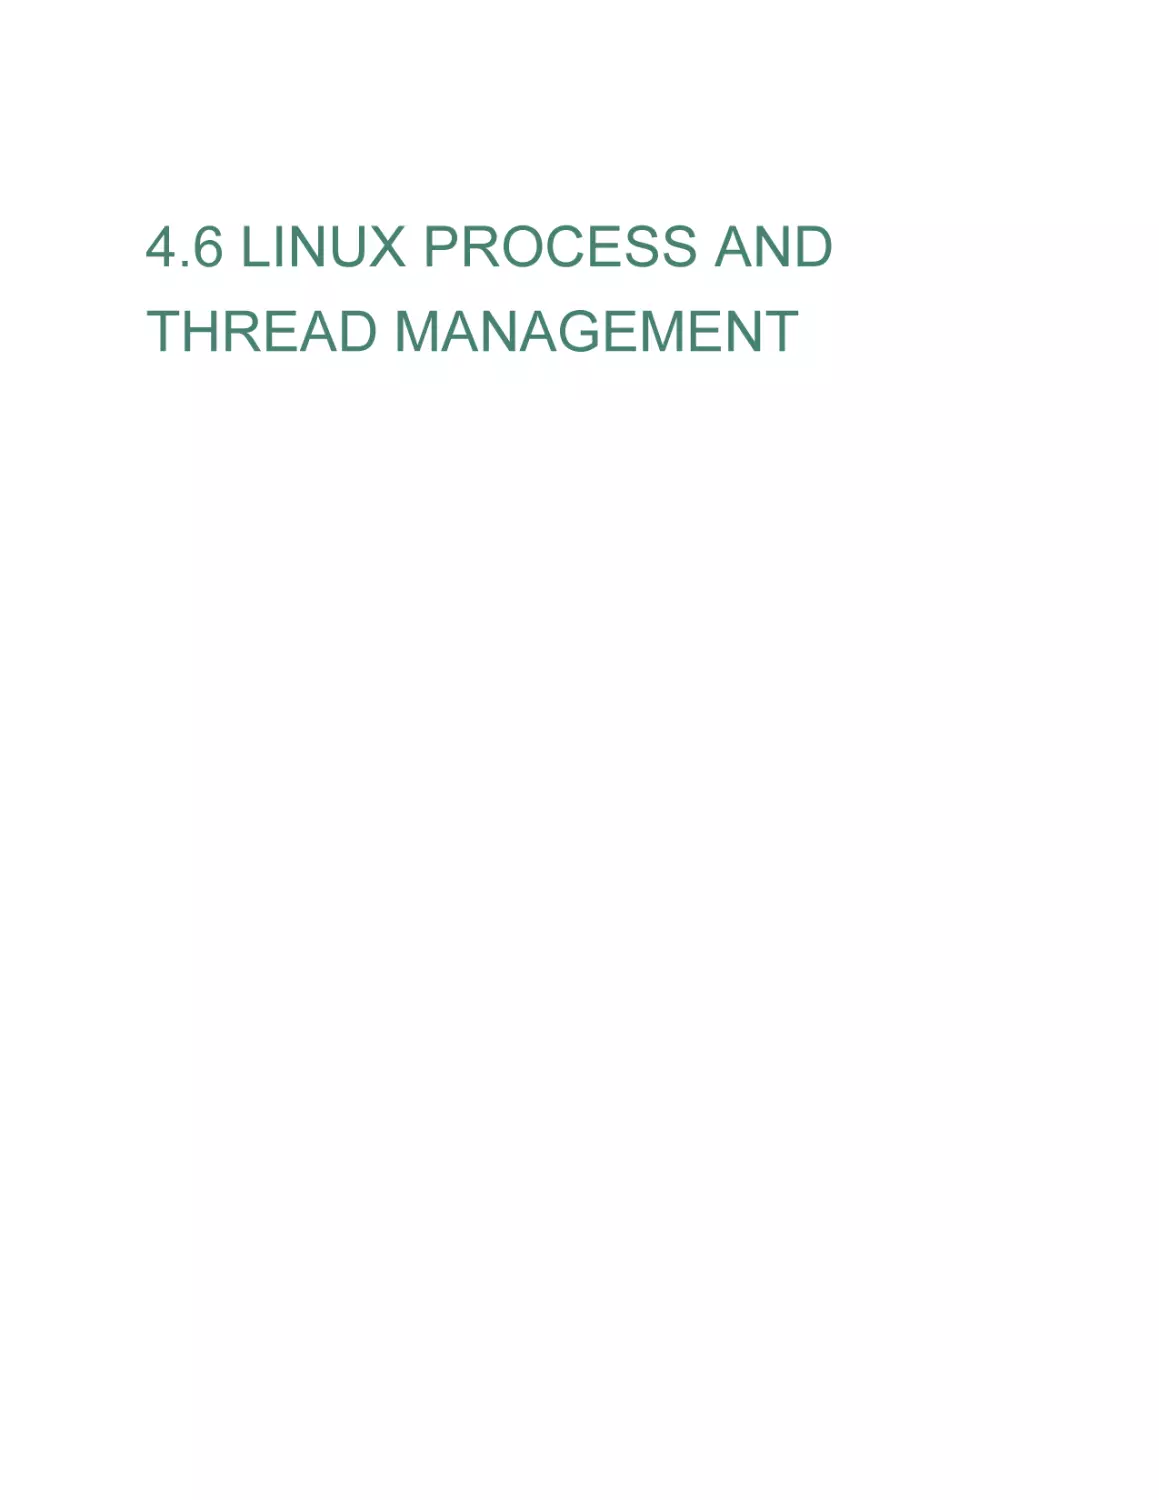 4.6 LINUX PROCESS AND THREAD MANAGEMENT